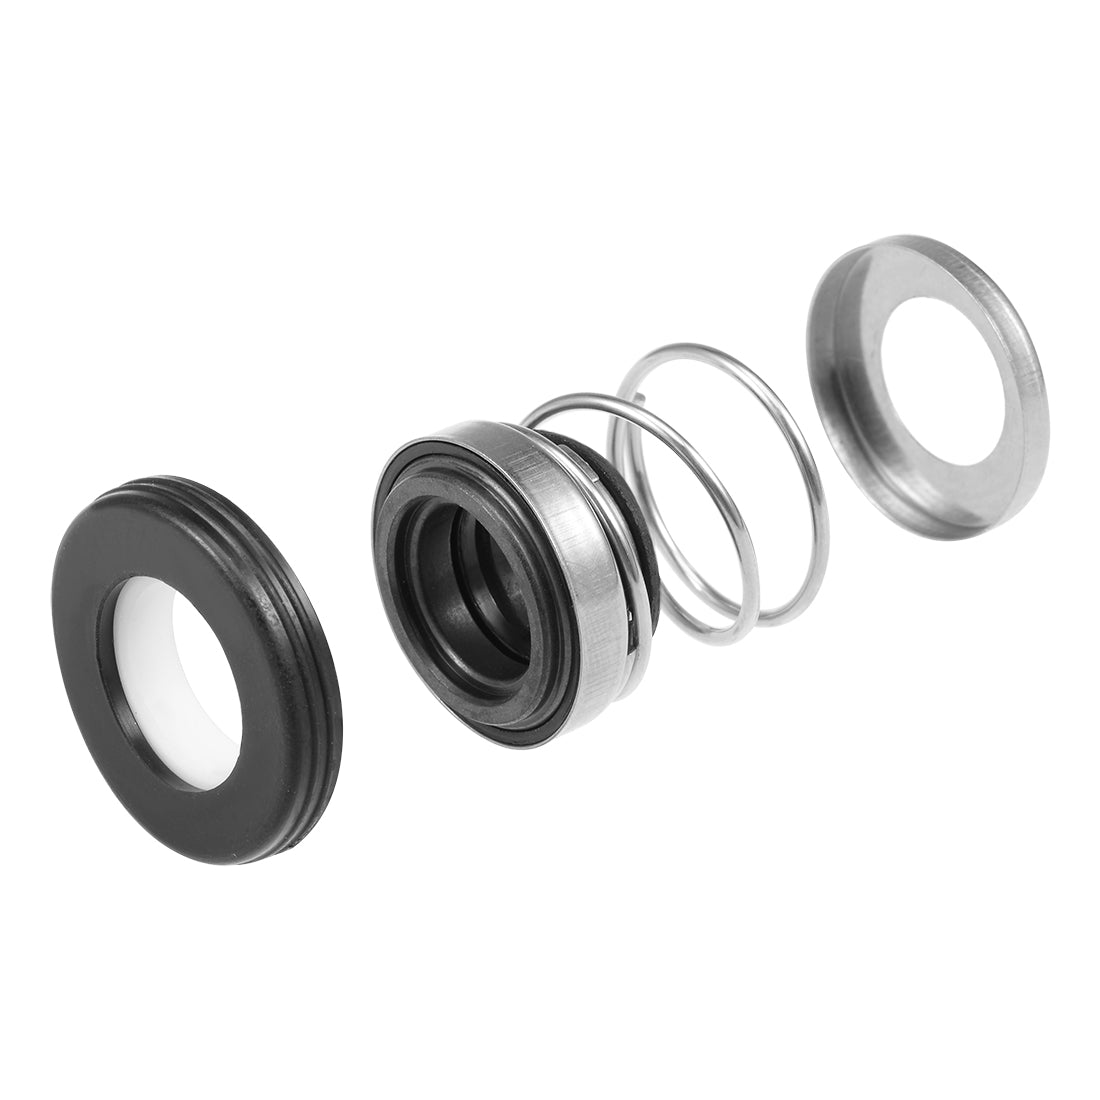 uxcell Uxcell Mechanical Shaft Seal Replacement for Pool Spa Pump 108-12